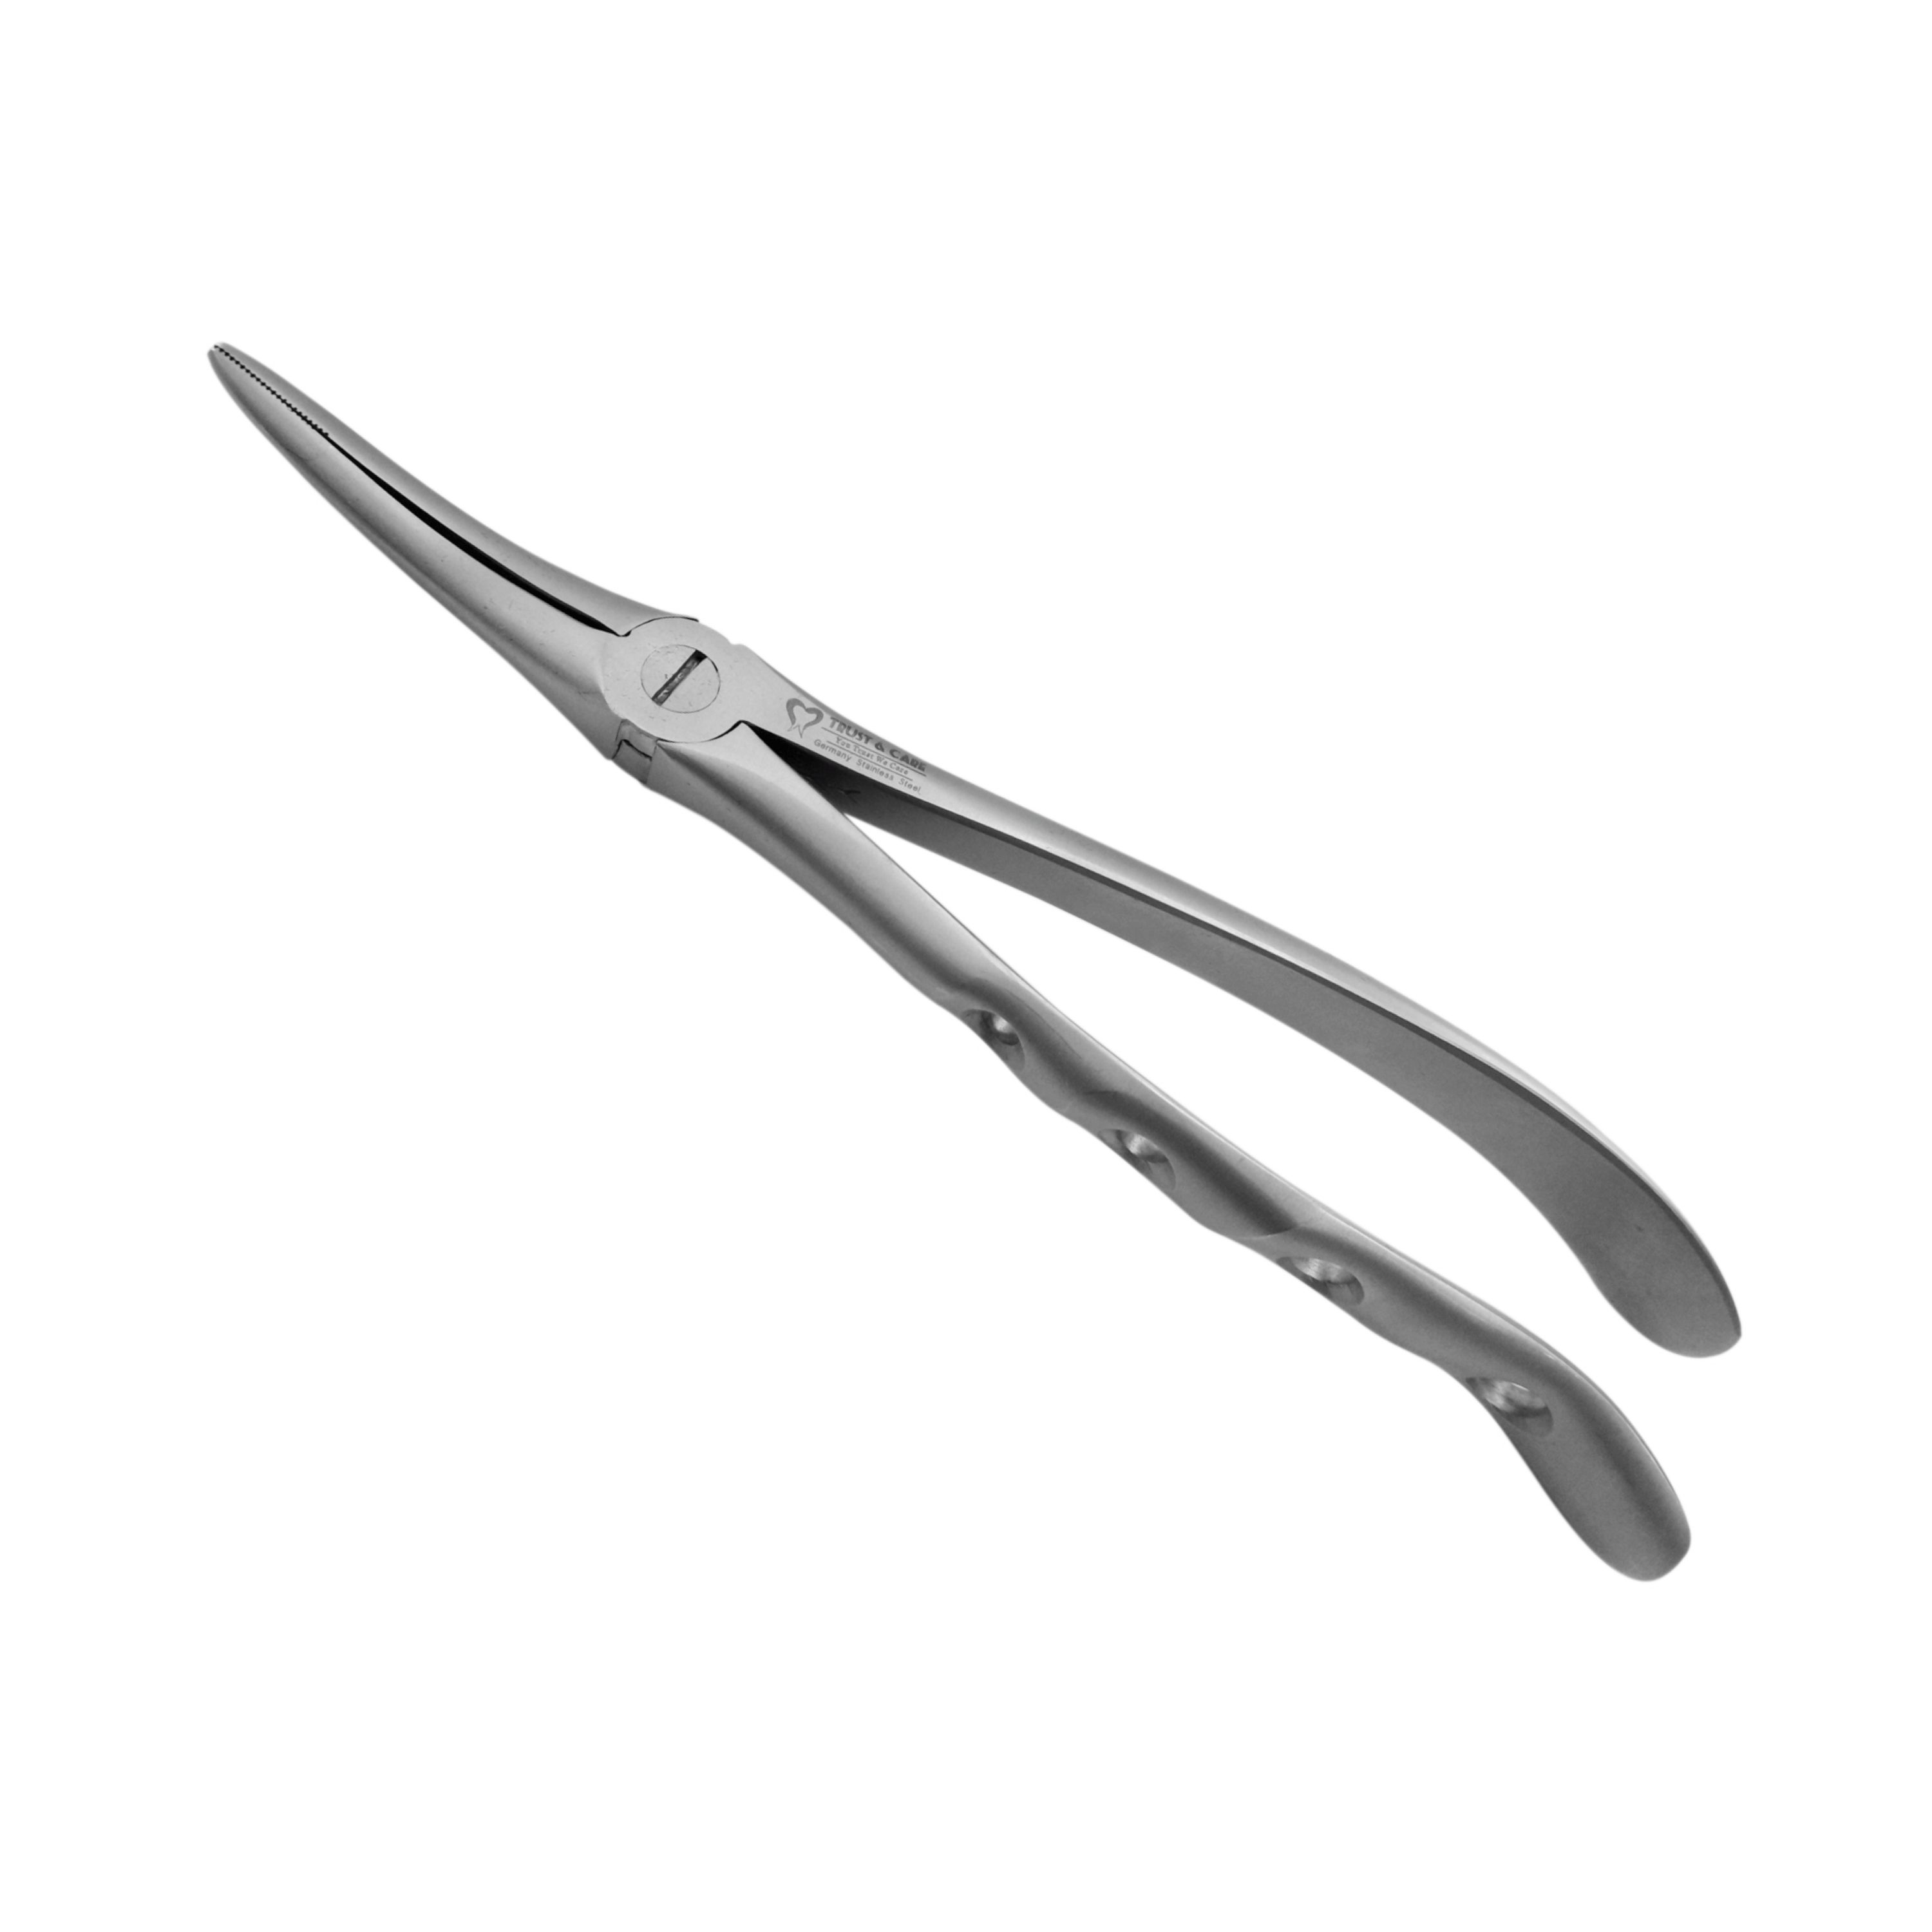 Trust & Care Secure Forcep Upper Roots Fig No. 149.11